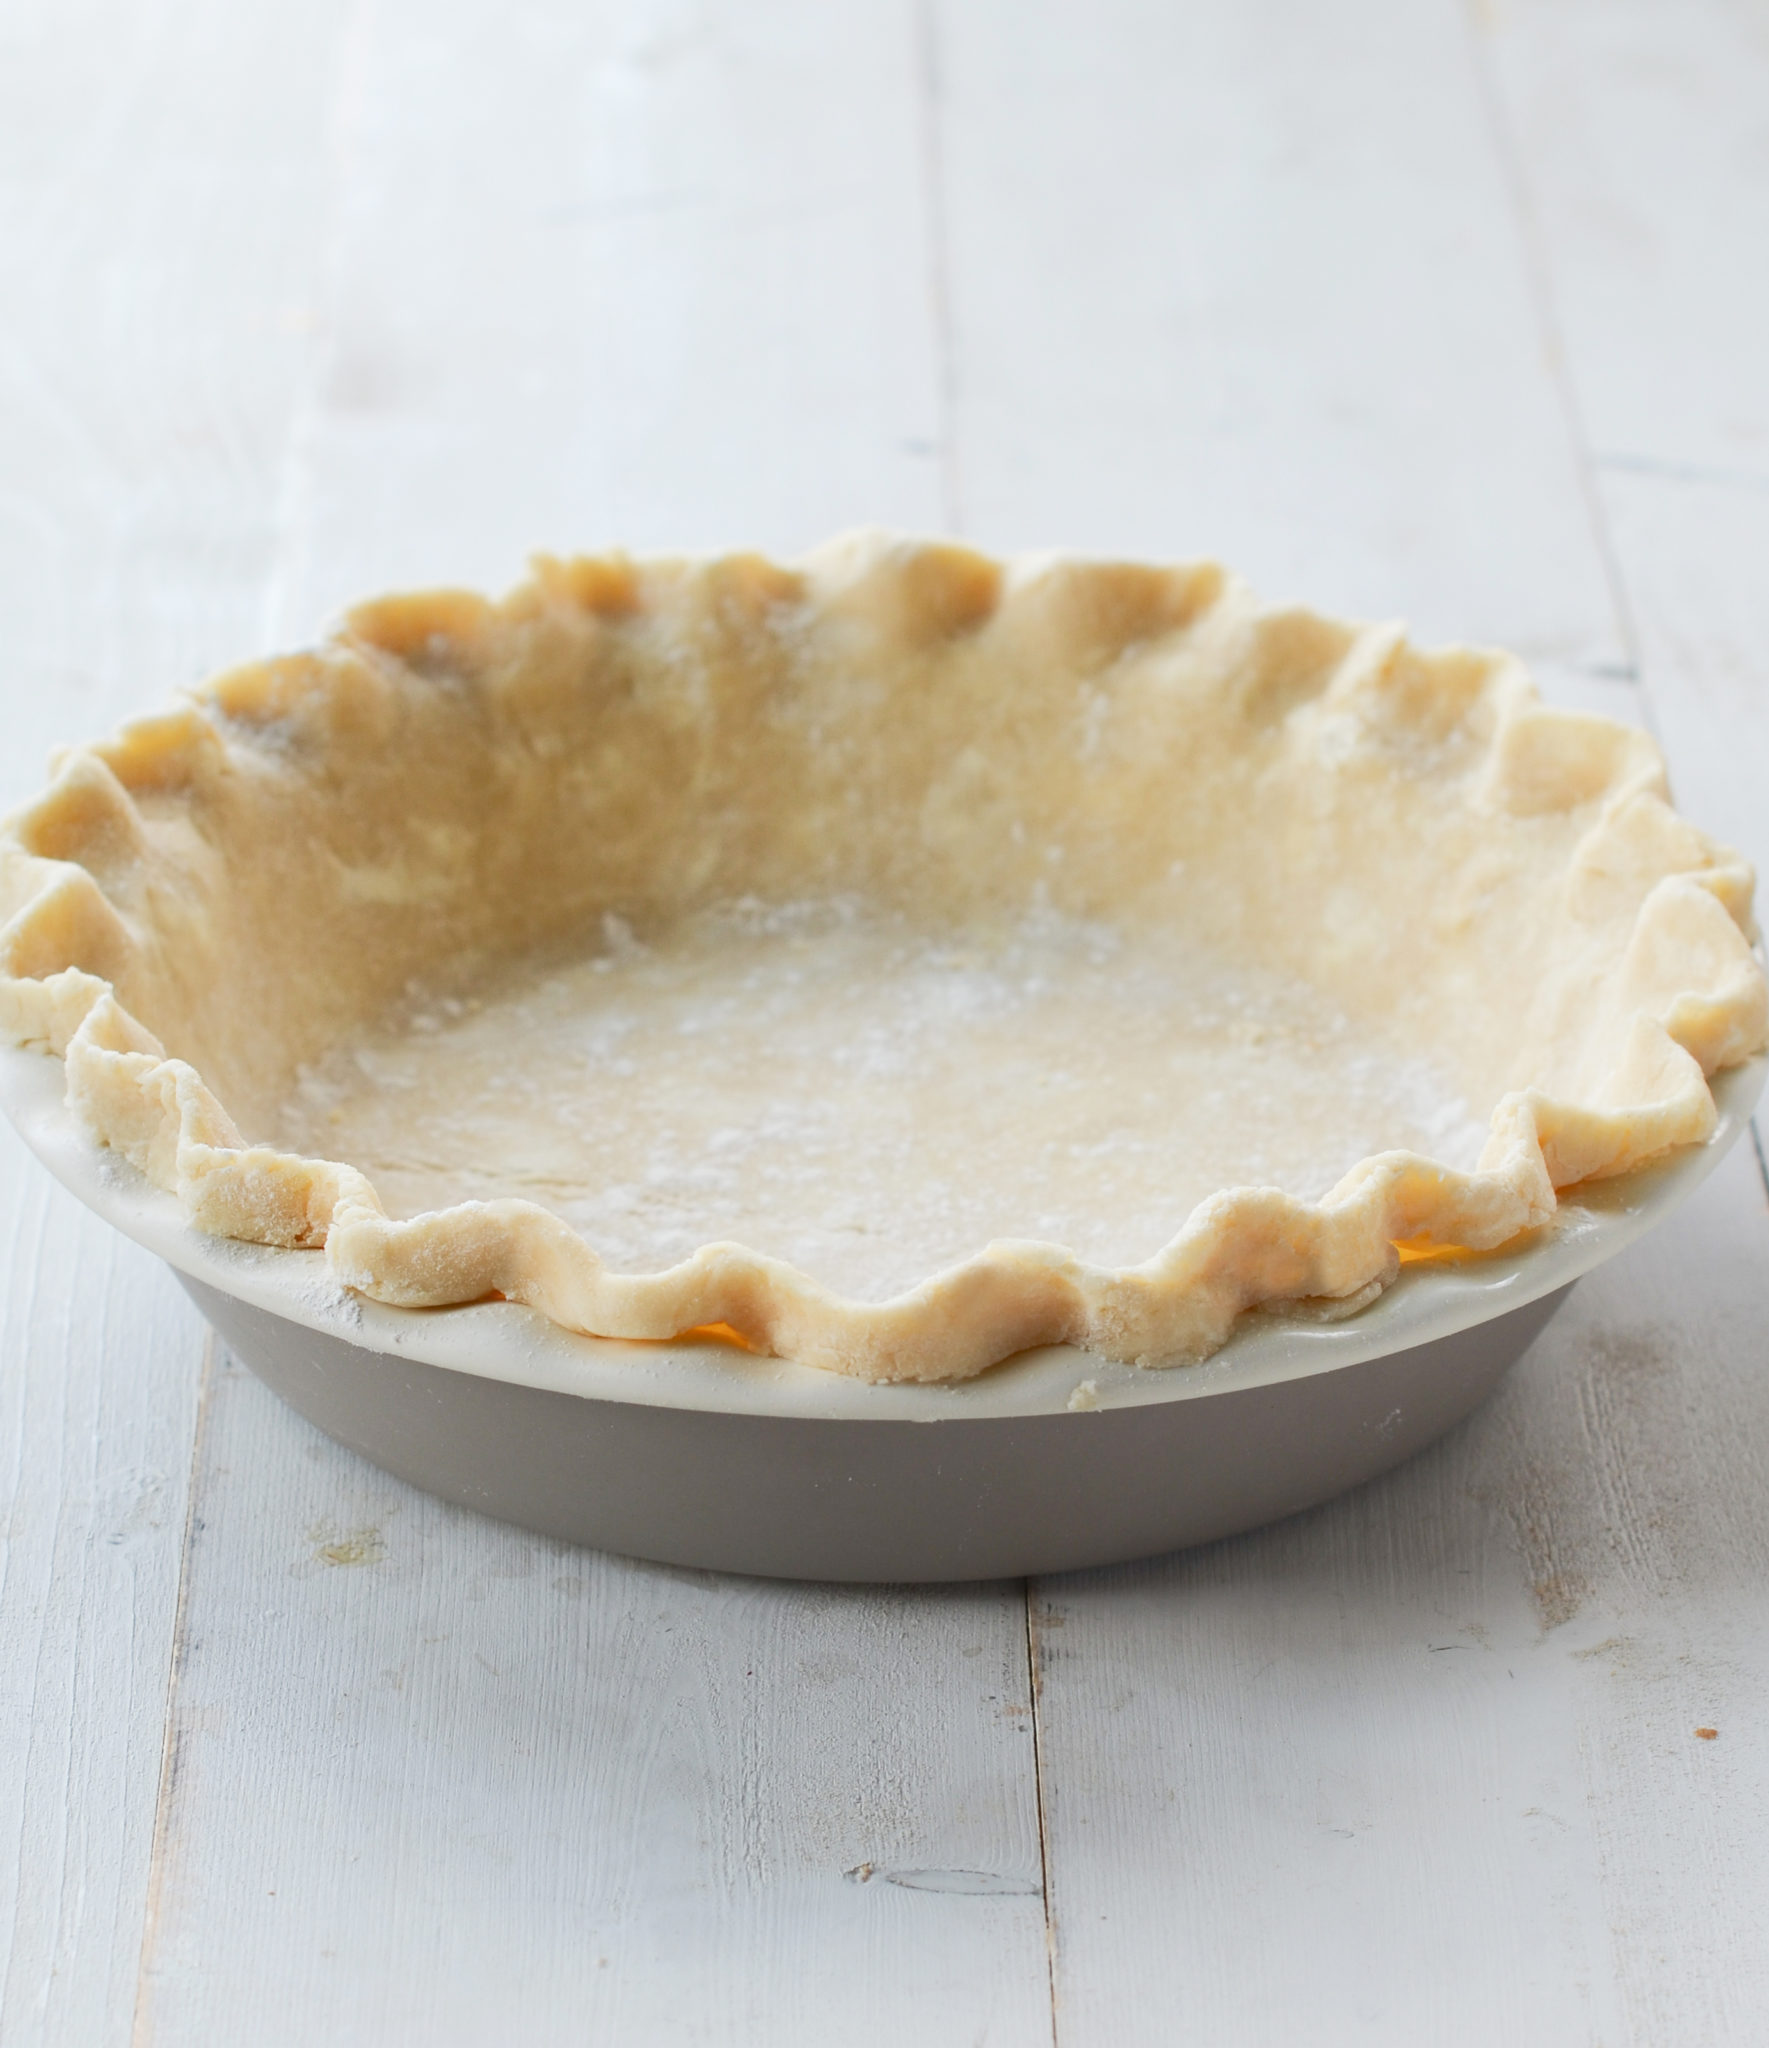 My Favorite Pie Crust Recipe - Once Upon a Chef